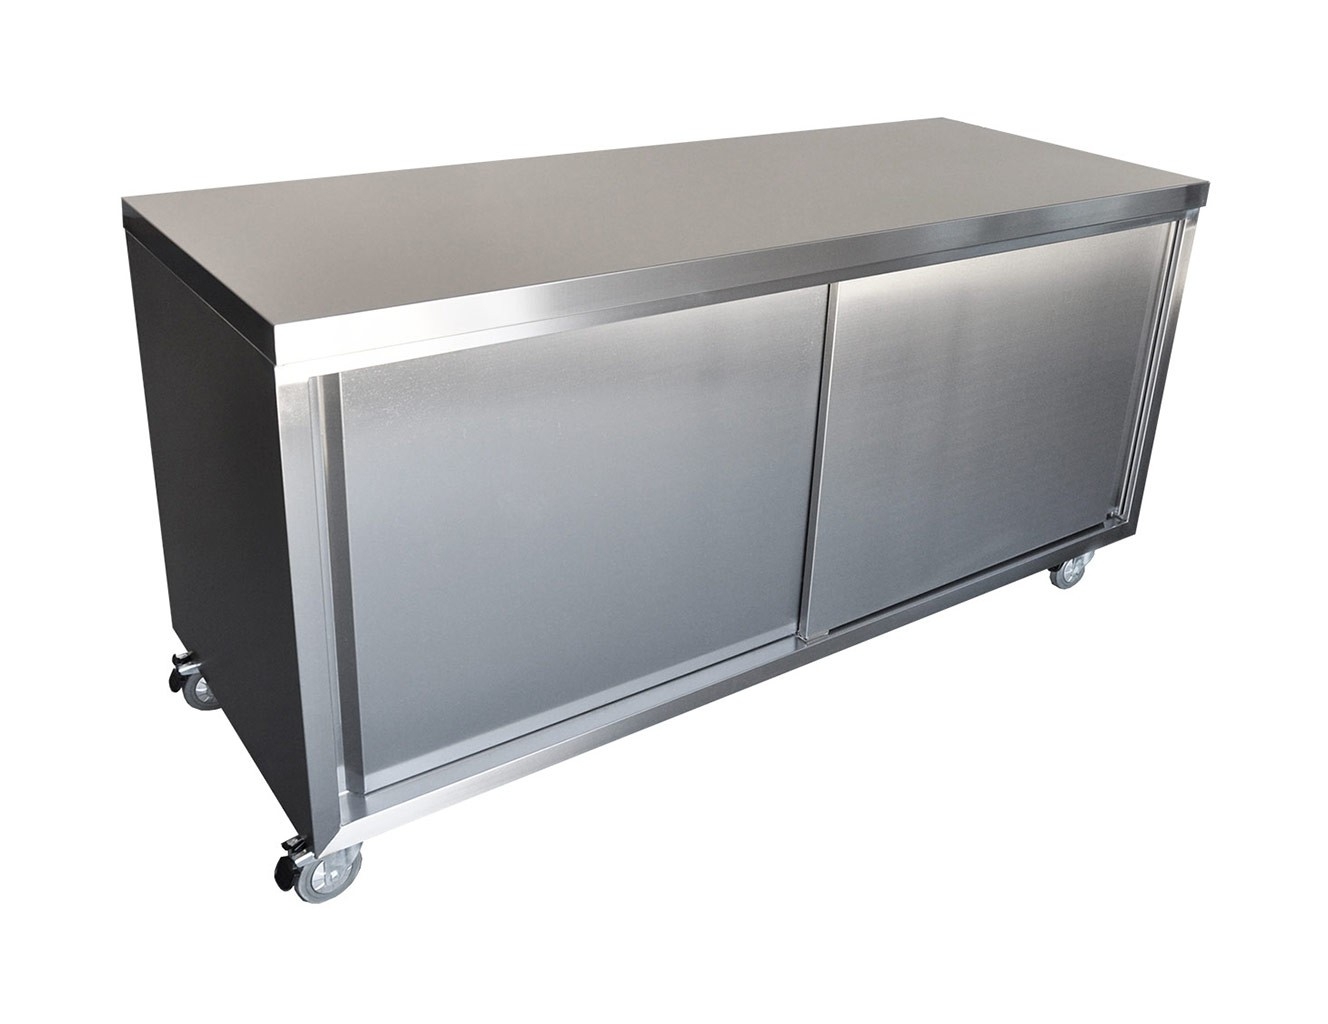 Outdoor Commercial Cabinet X X Mm High Brayco Stainless Steel New Zealand